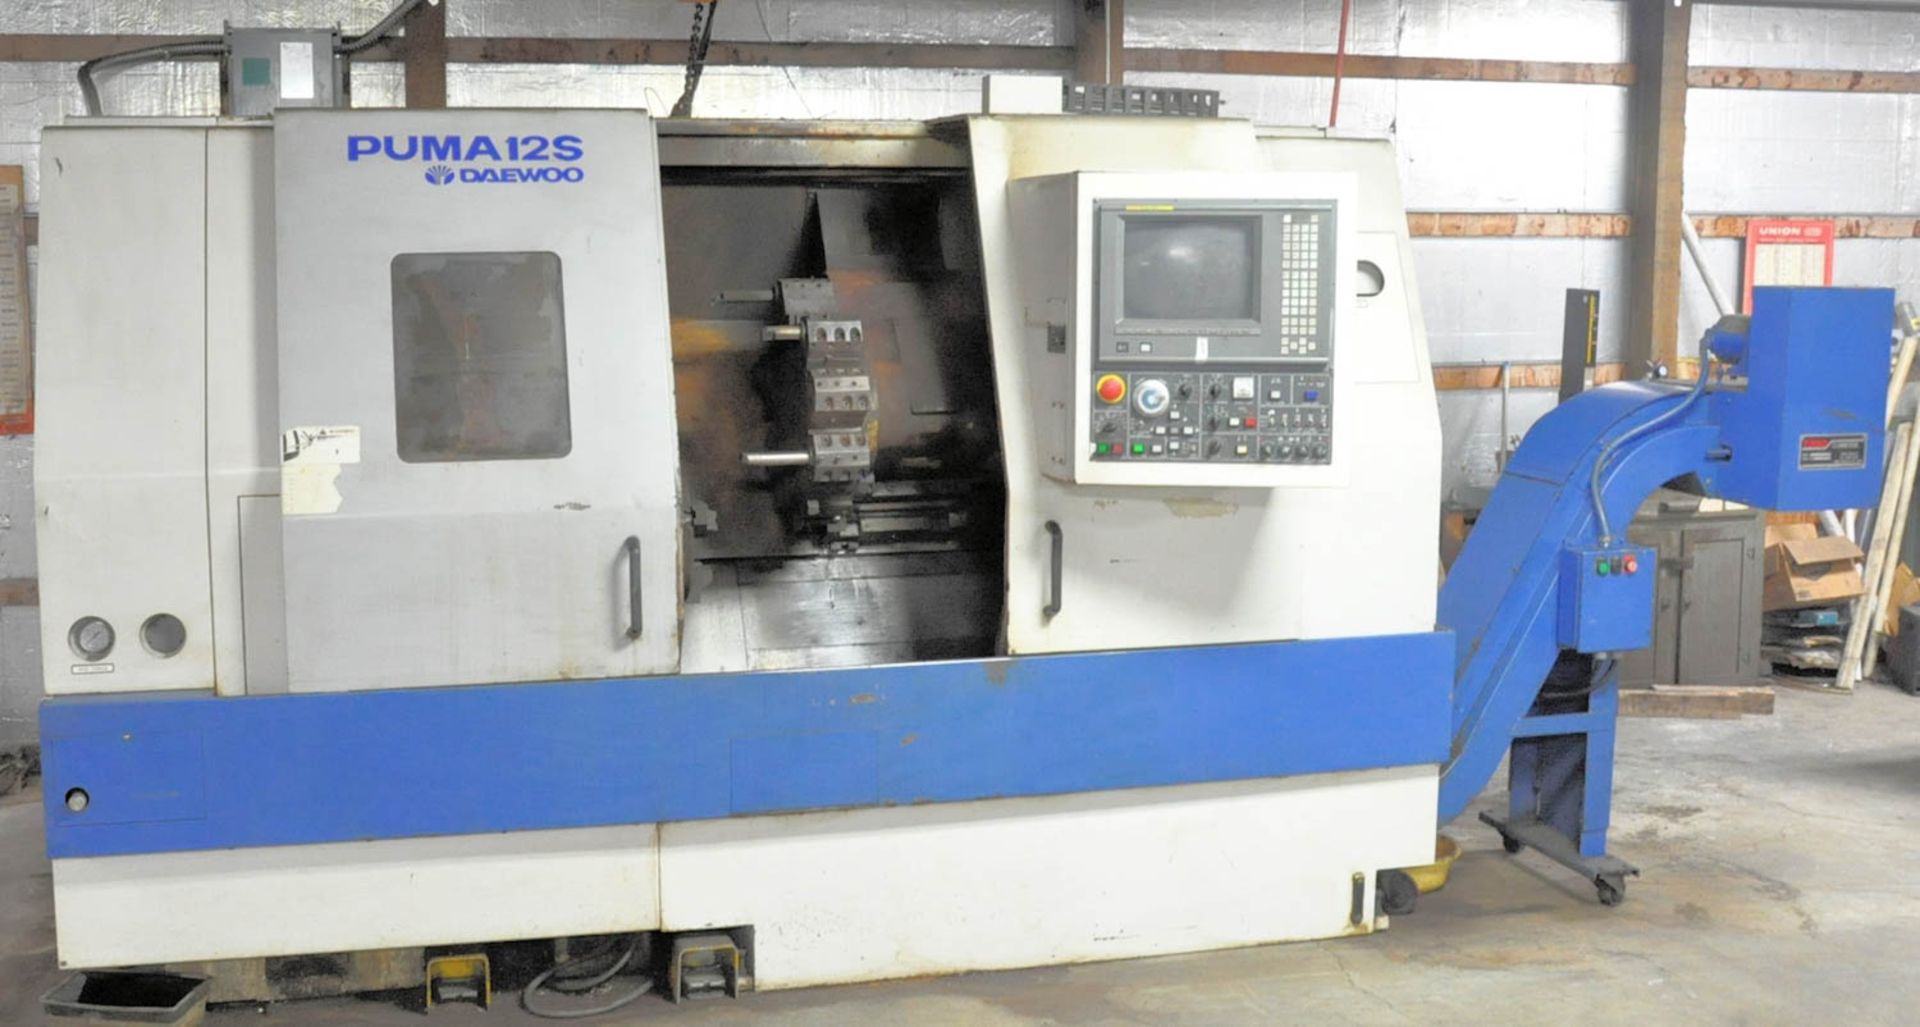 DAEWOO PUMA MDL. 12S LATHE, WITH FANUC SERIES 18-T CNC CONTROLLER, 3" THRU SPINDLE, 18" X 30" - Image 2 of 9